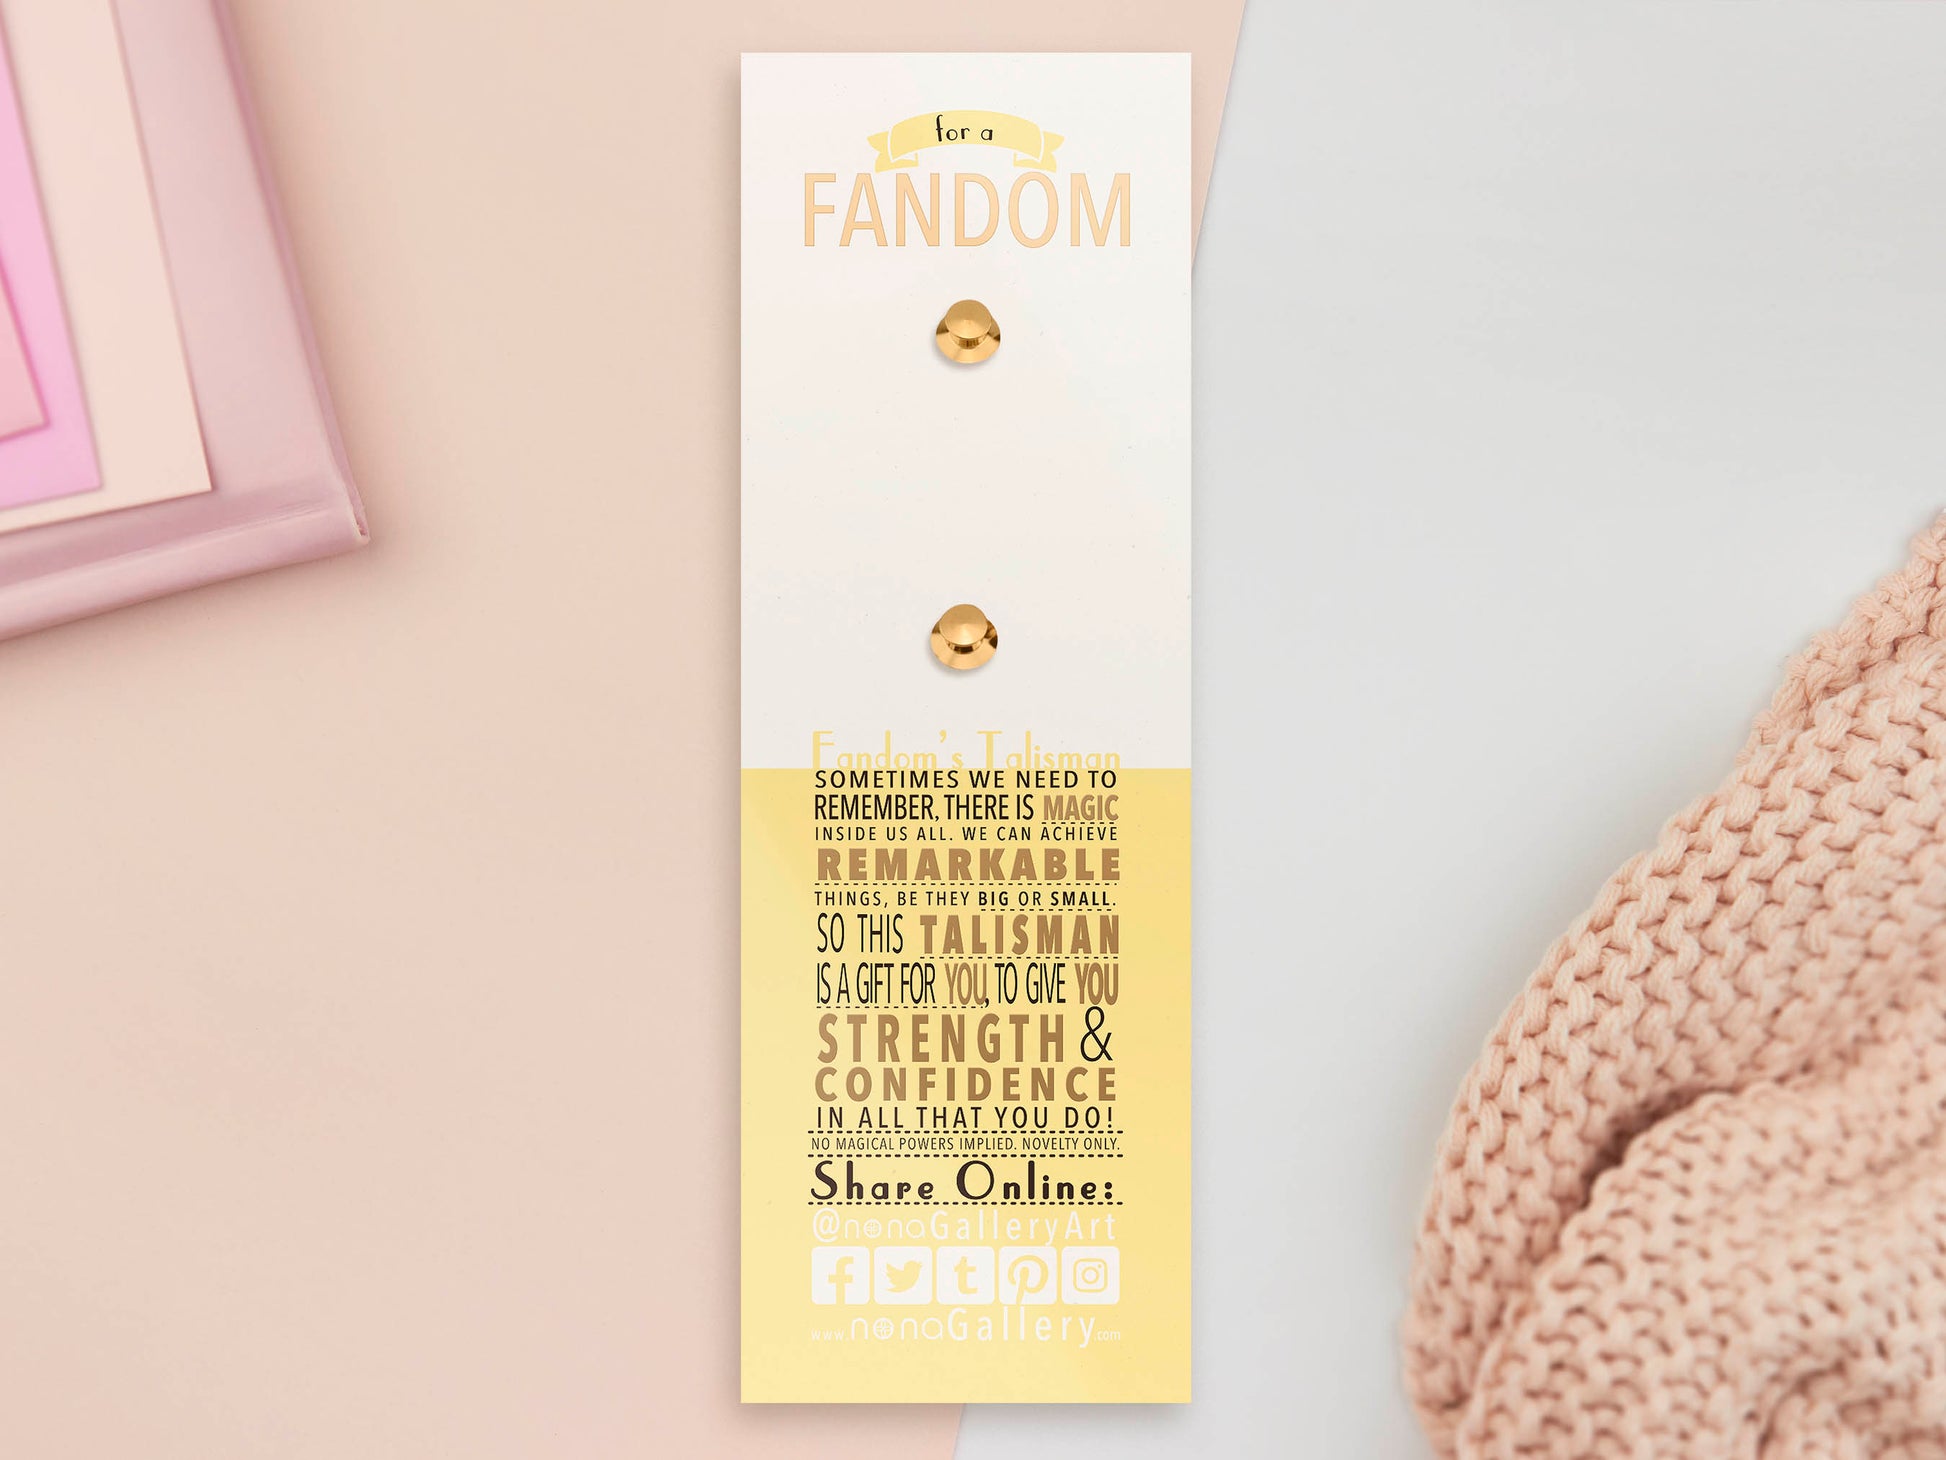 The back of the long white and yellow backing card with gold accents. The backing card details the symbolism of the different design elements of the Fandom Talisman pin. Also shown is the two gold locking pin backs attached to the card.